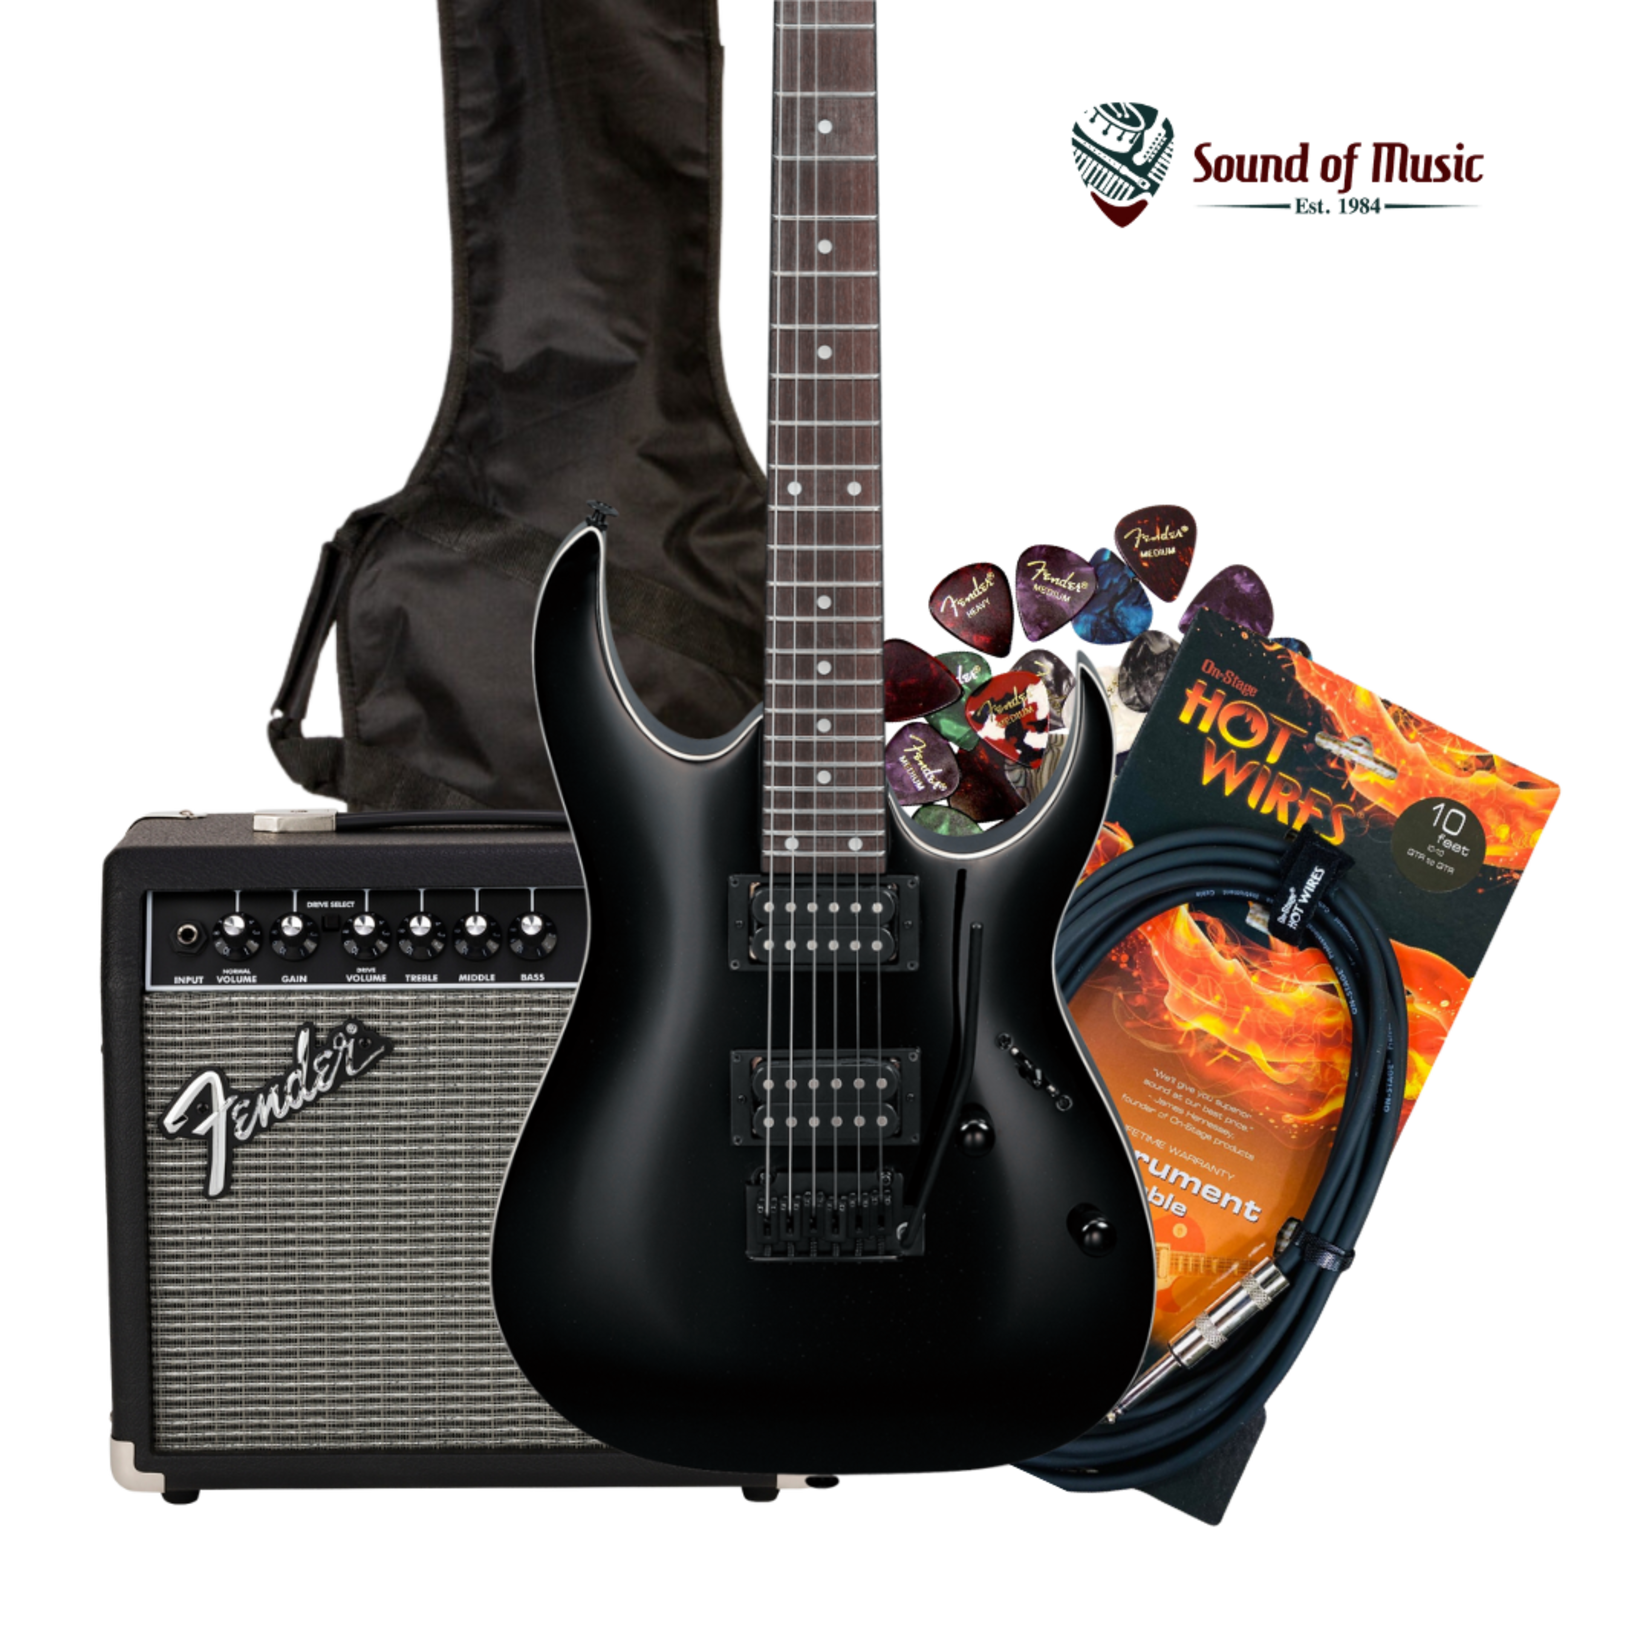 Ibanez GRGA120 GIO RGA Series Electric Guitar - Black Night - Package Deal With Amp, Bag, Cable, Strap, and Picks